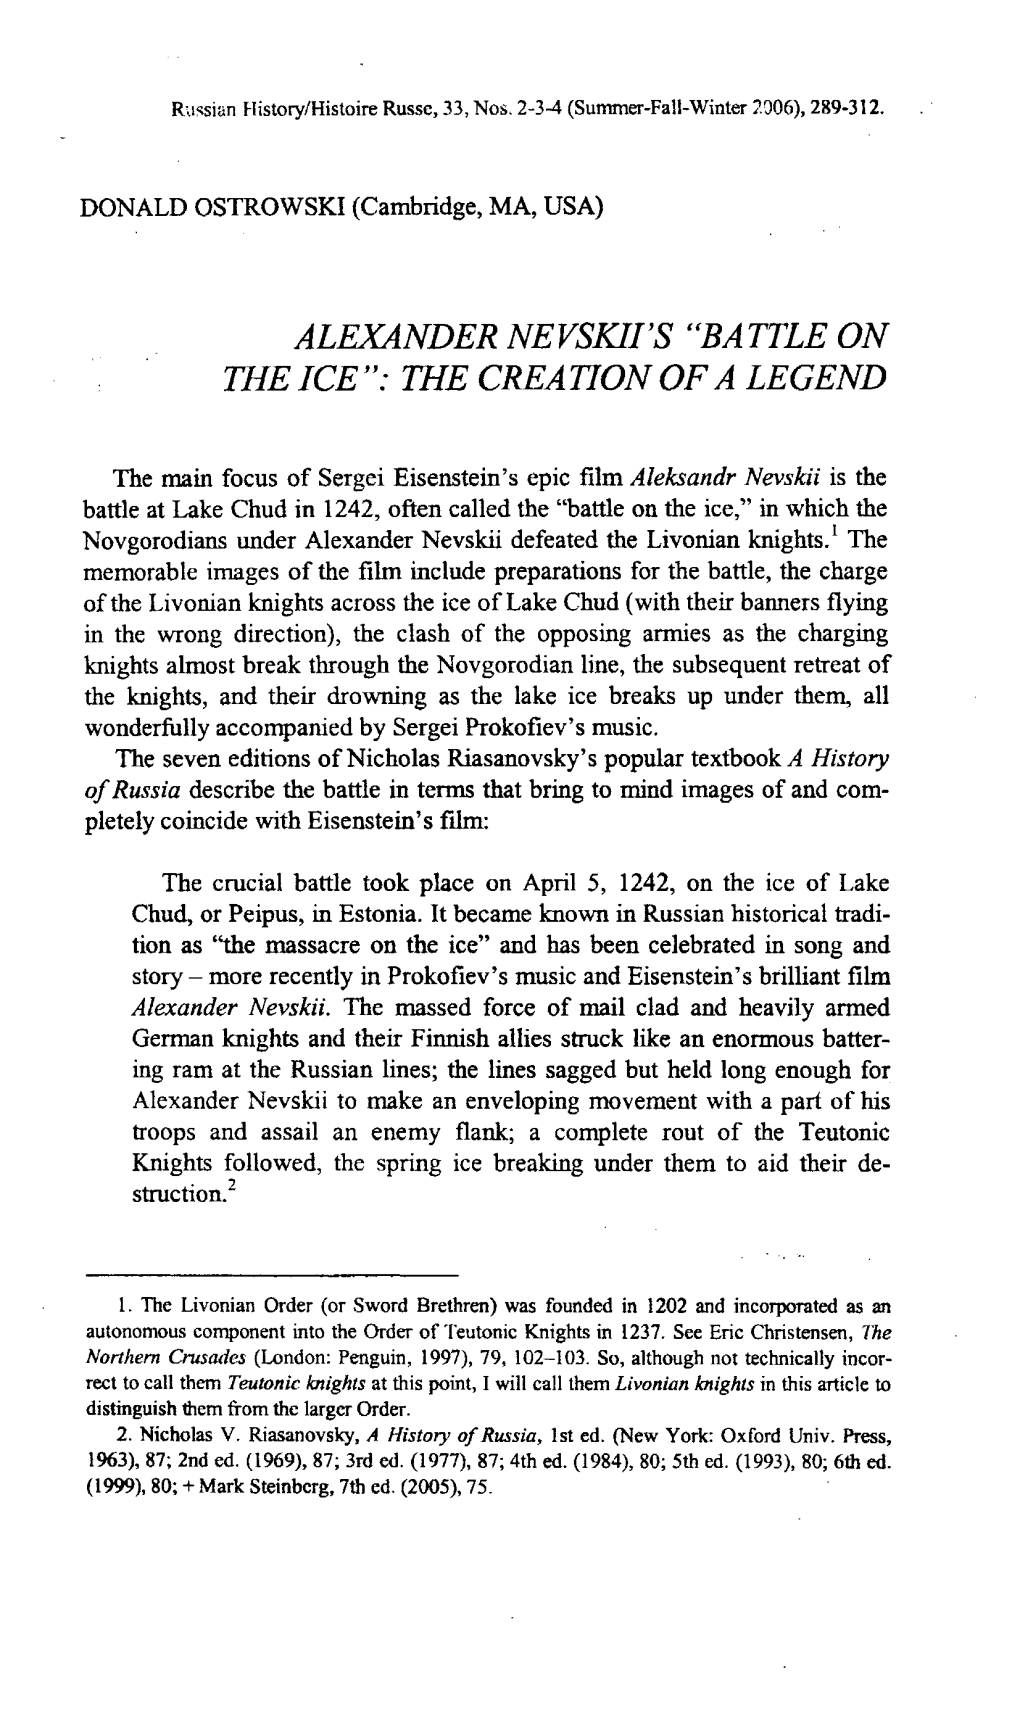 Alexander Nevskii's "Battle on the Ice": the Creation of a Legend